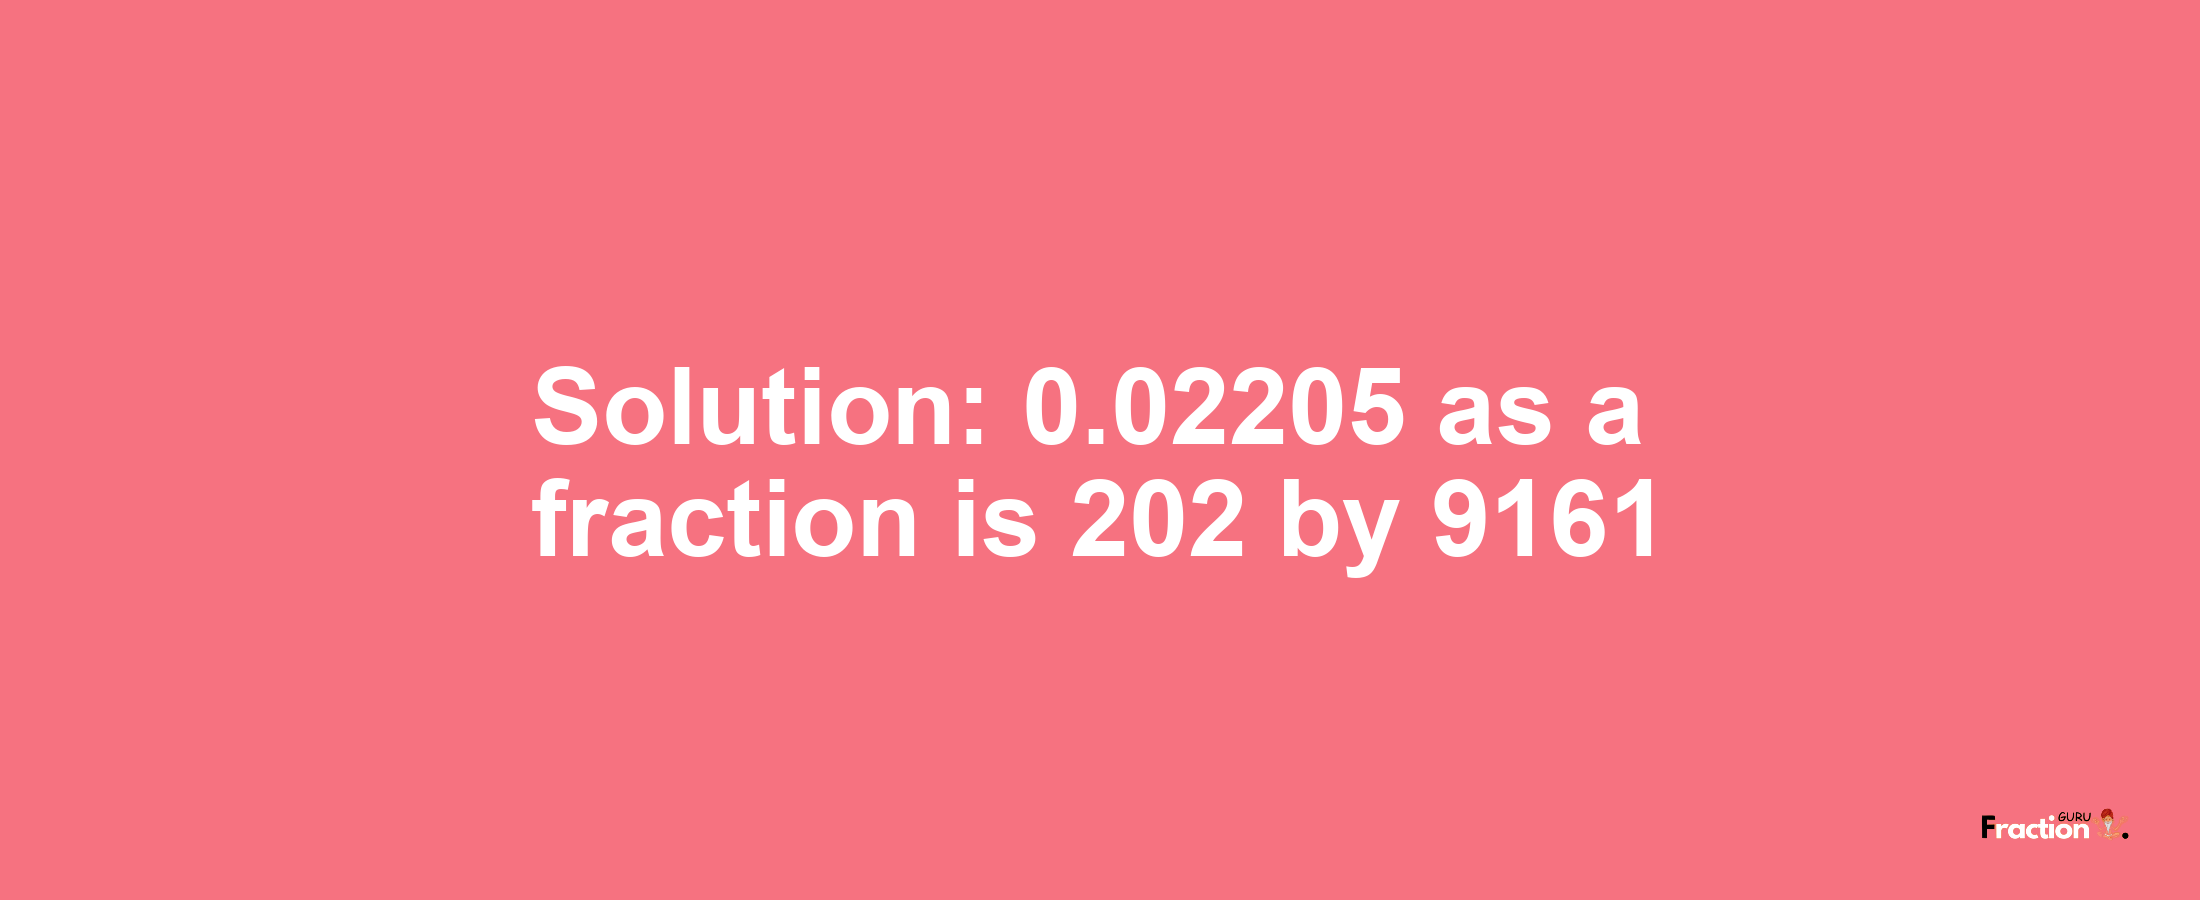 Solution:0.02205 as a fraction is 202/9161